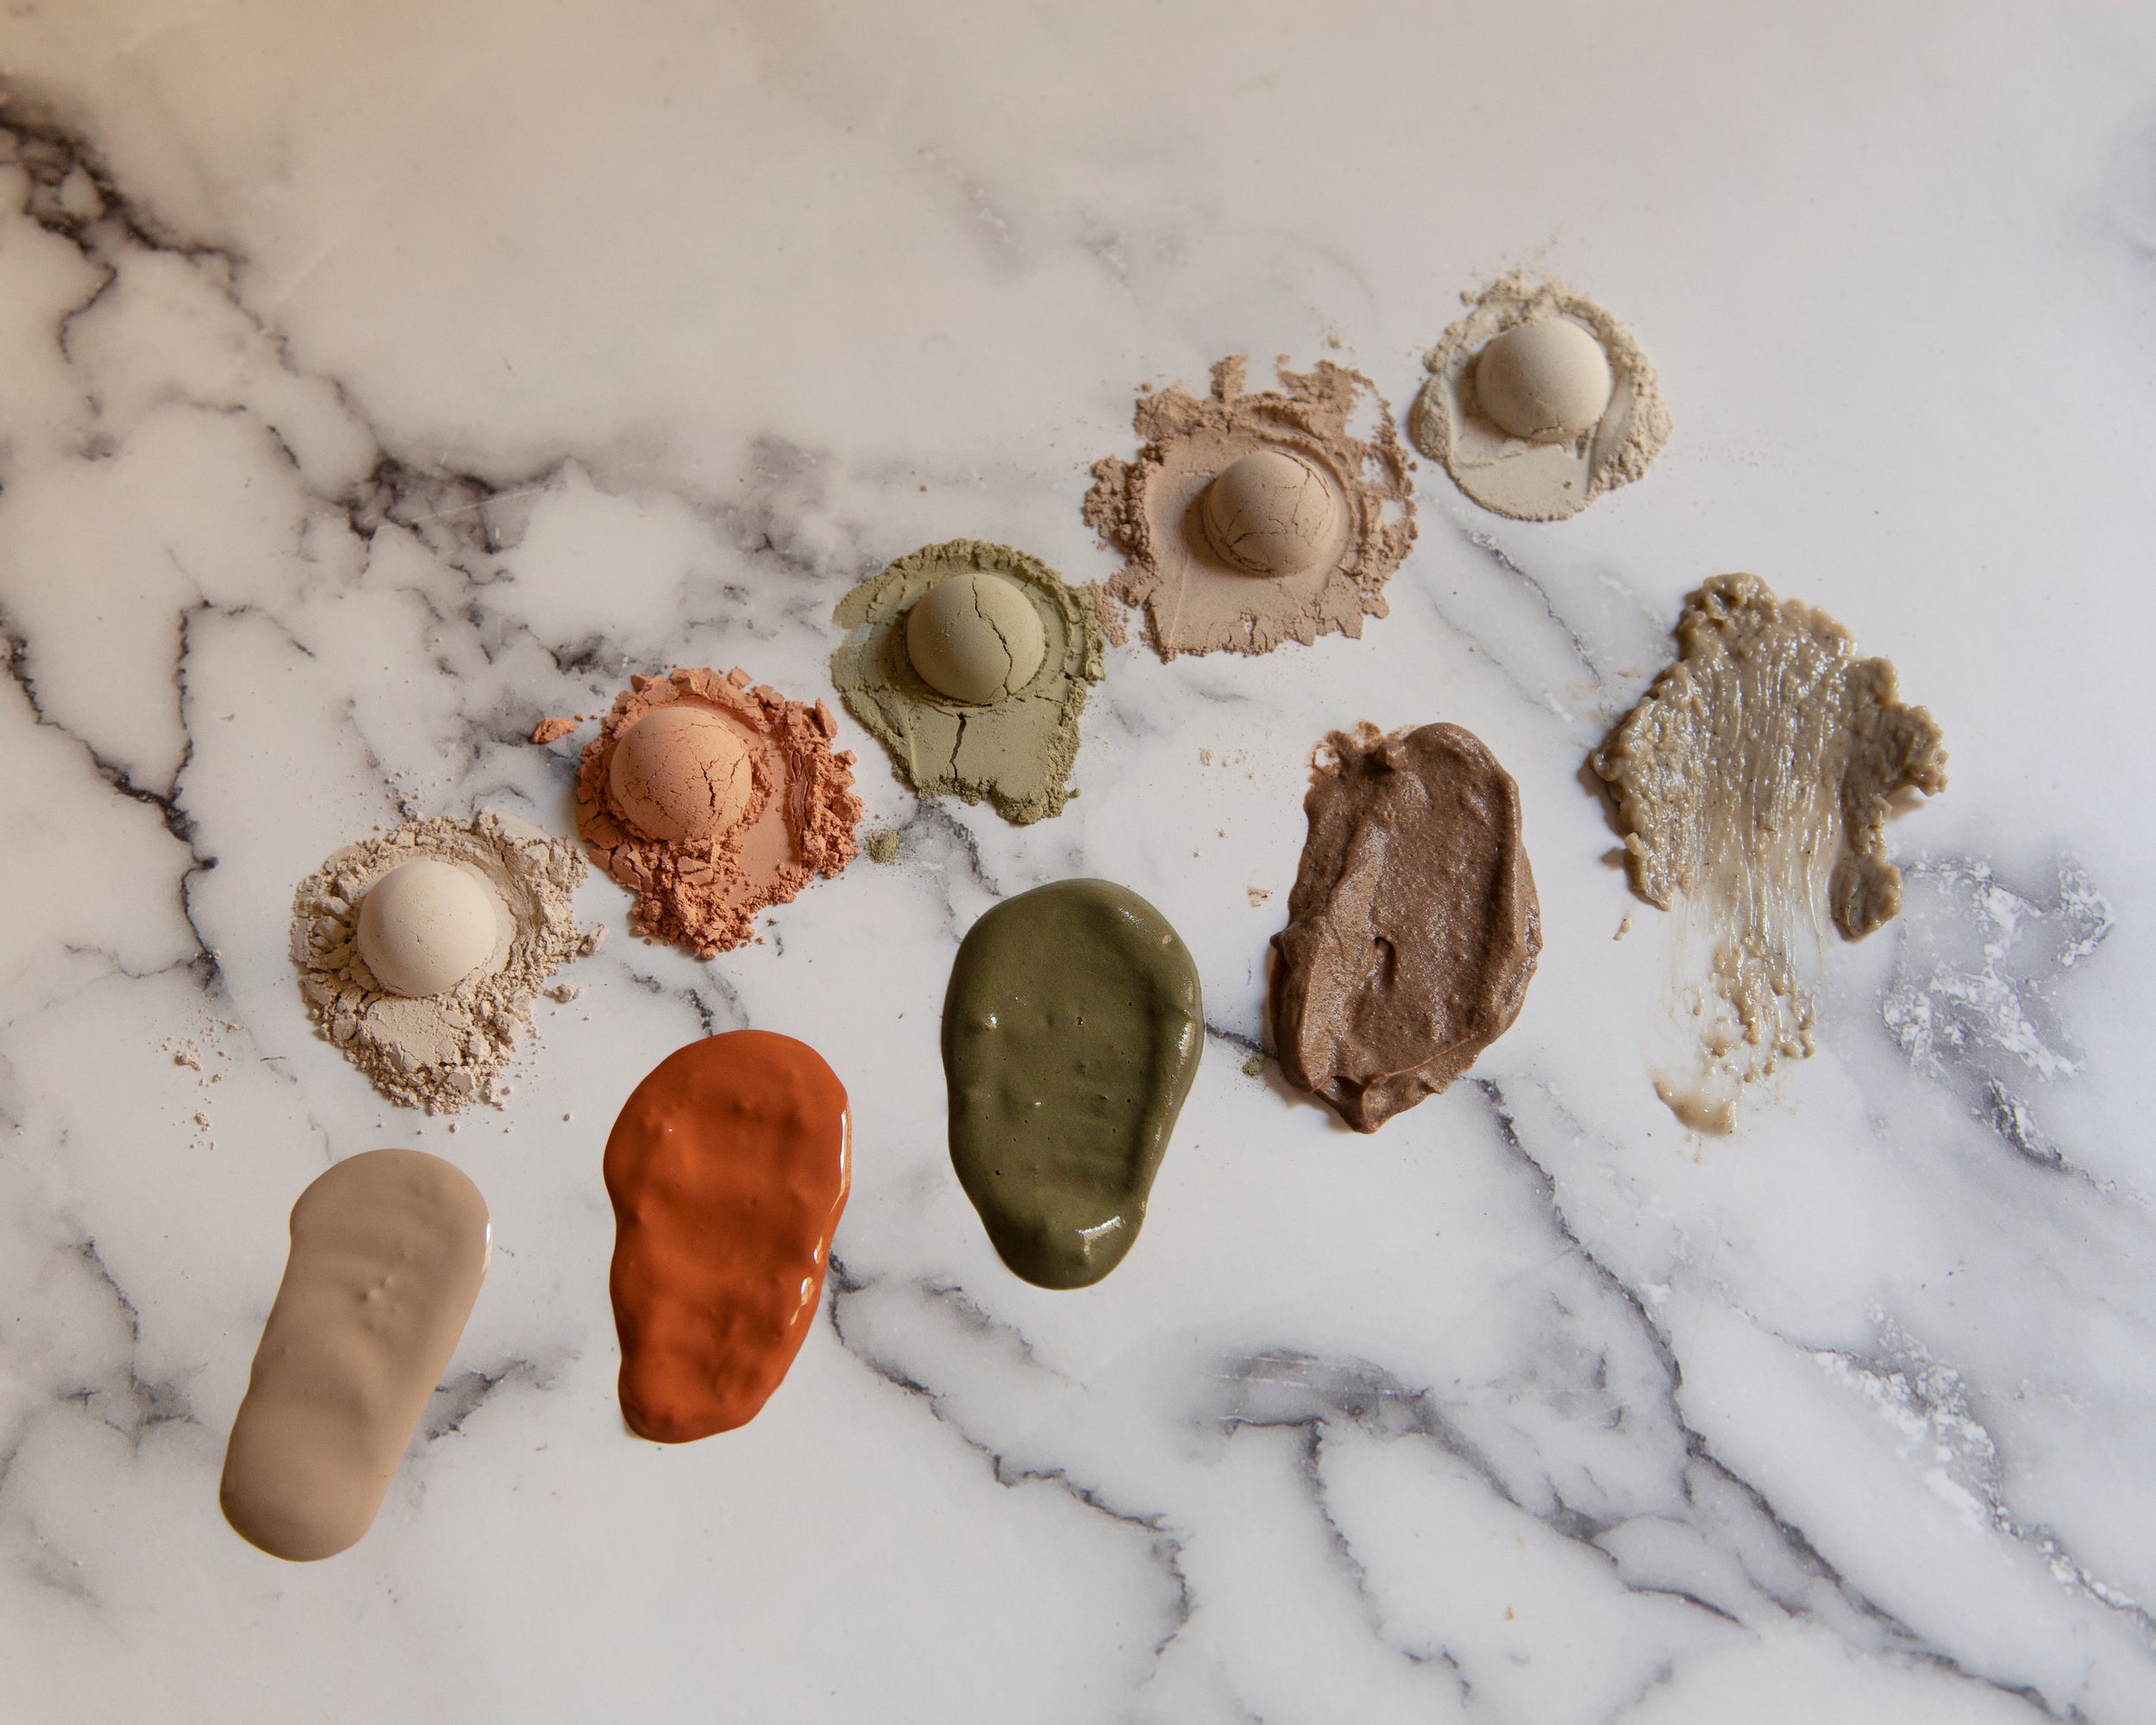 Different Types of Cosmetic Clays for Face and Body - rhassoul, bentonite, pink kaolin, white kaolin, cosmetic clays